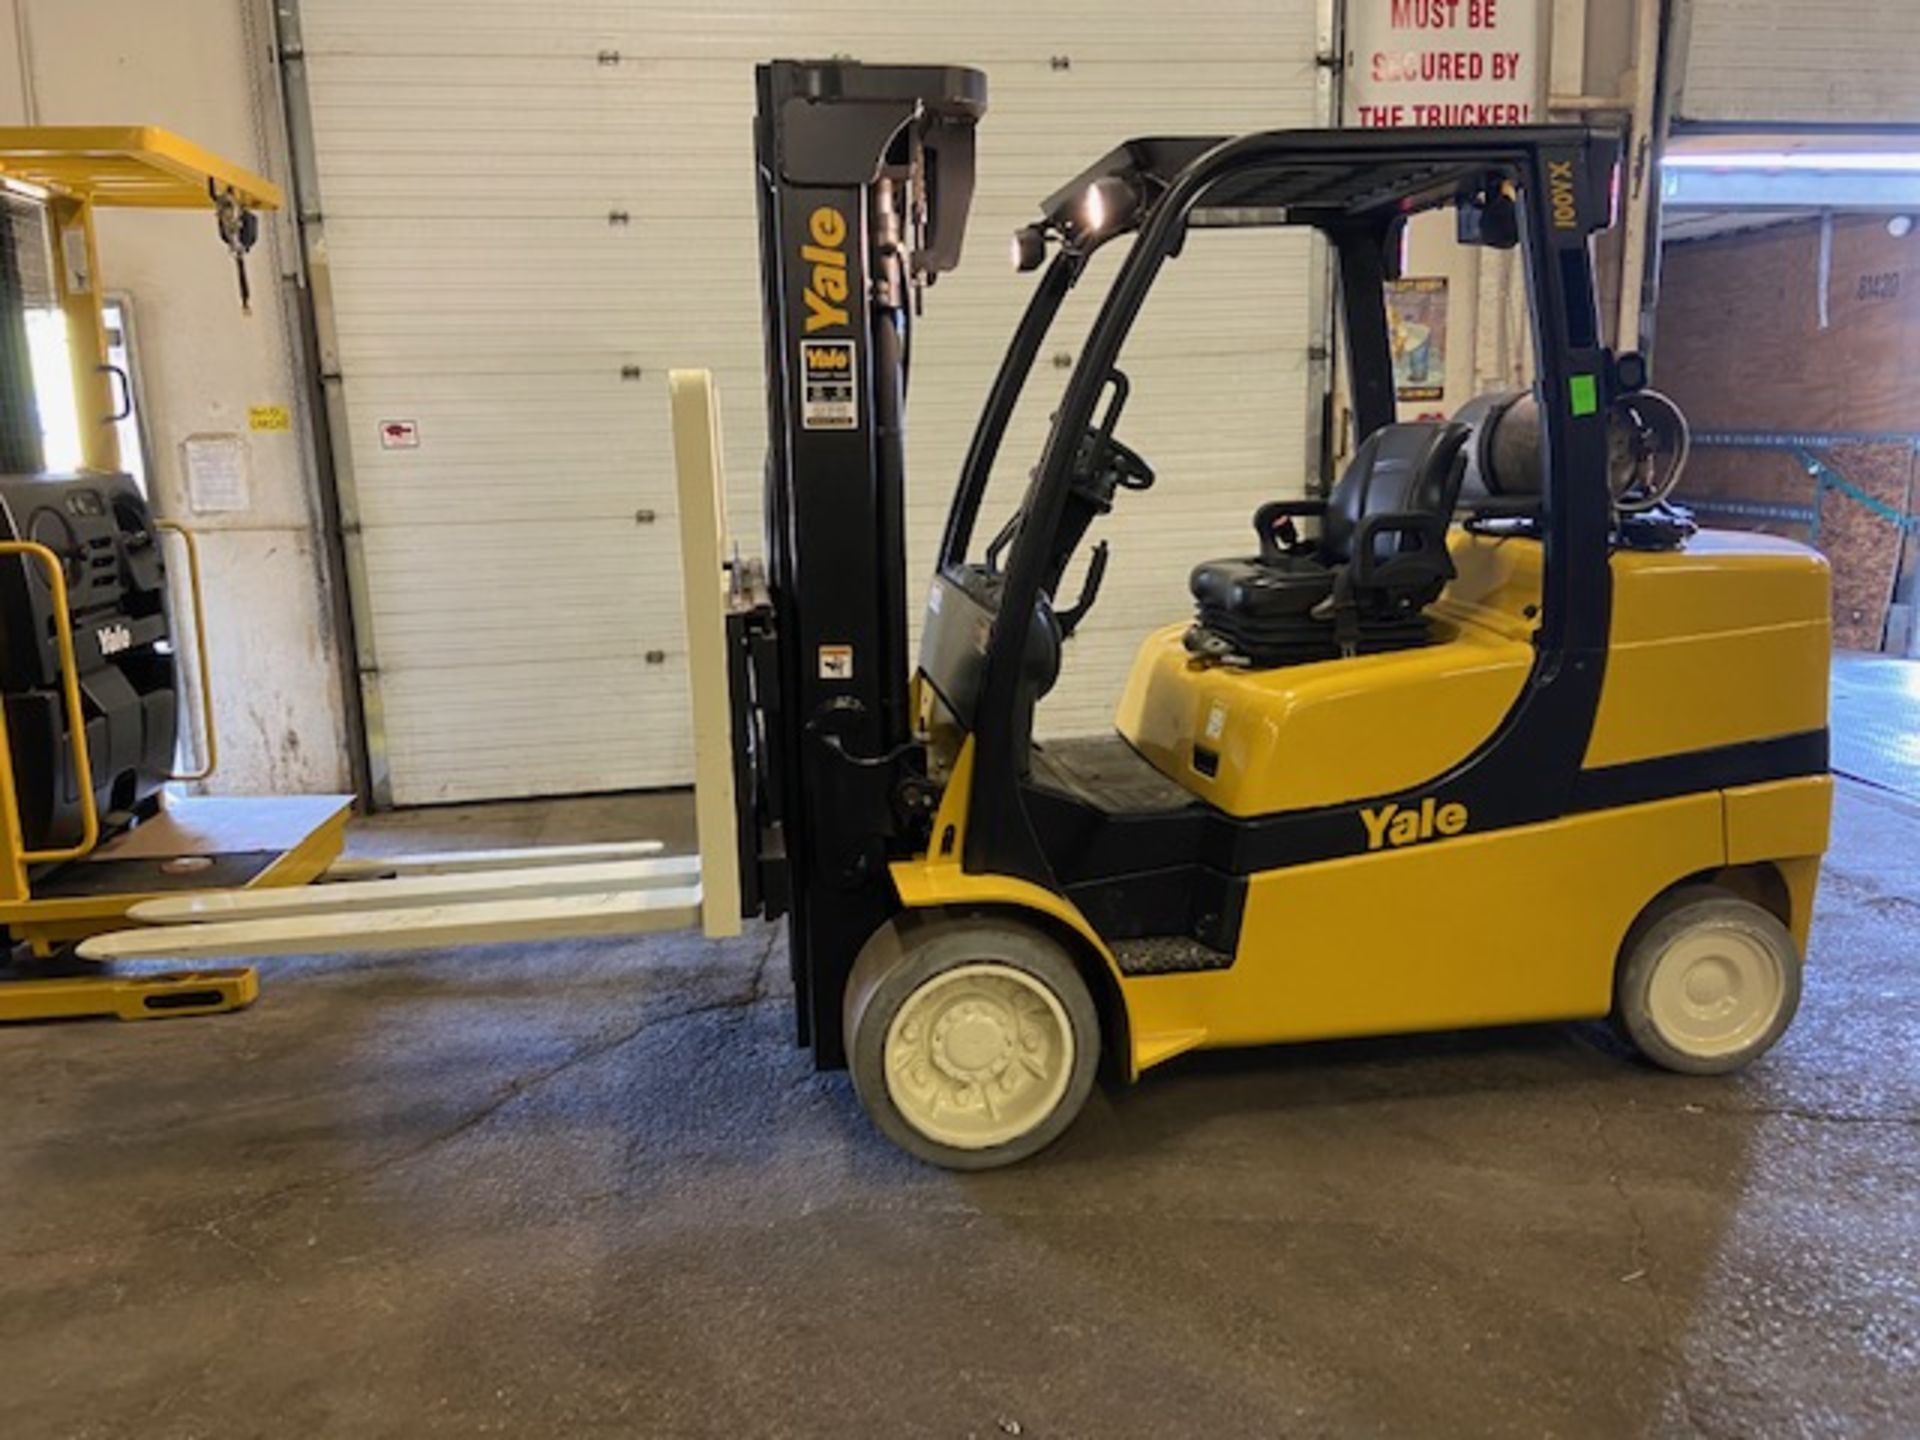 FREE CUSTOMS - 2009 Yale 10,000lbs Forklift with sideshift 3-stage mast LPG (propane) 54" forks